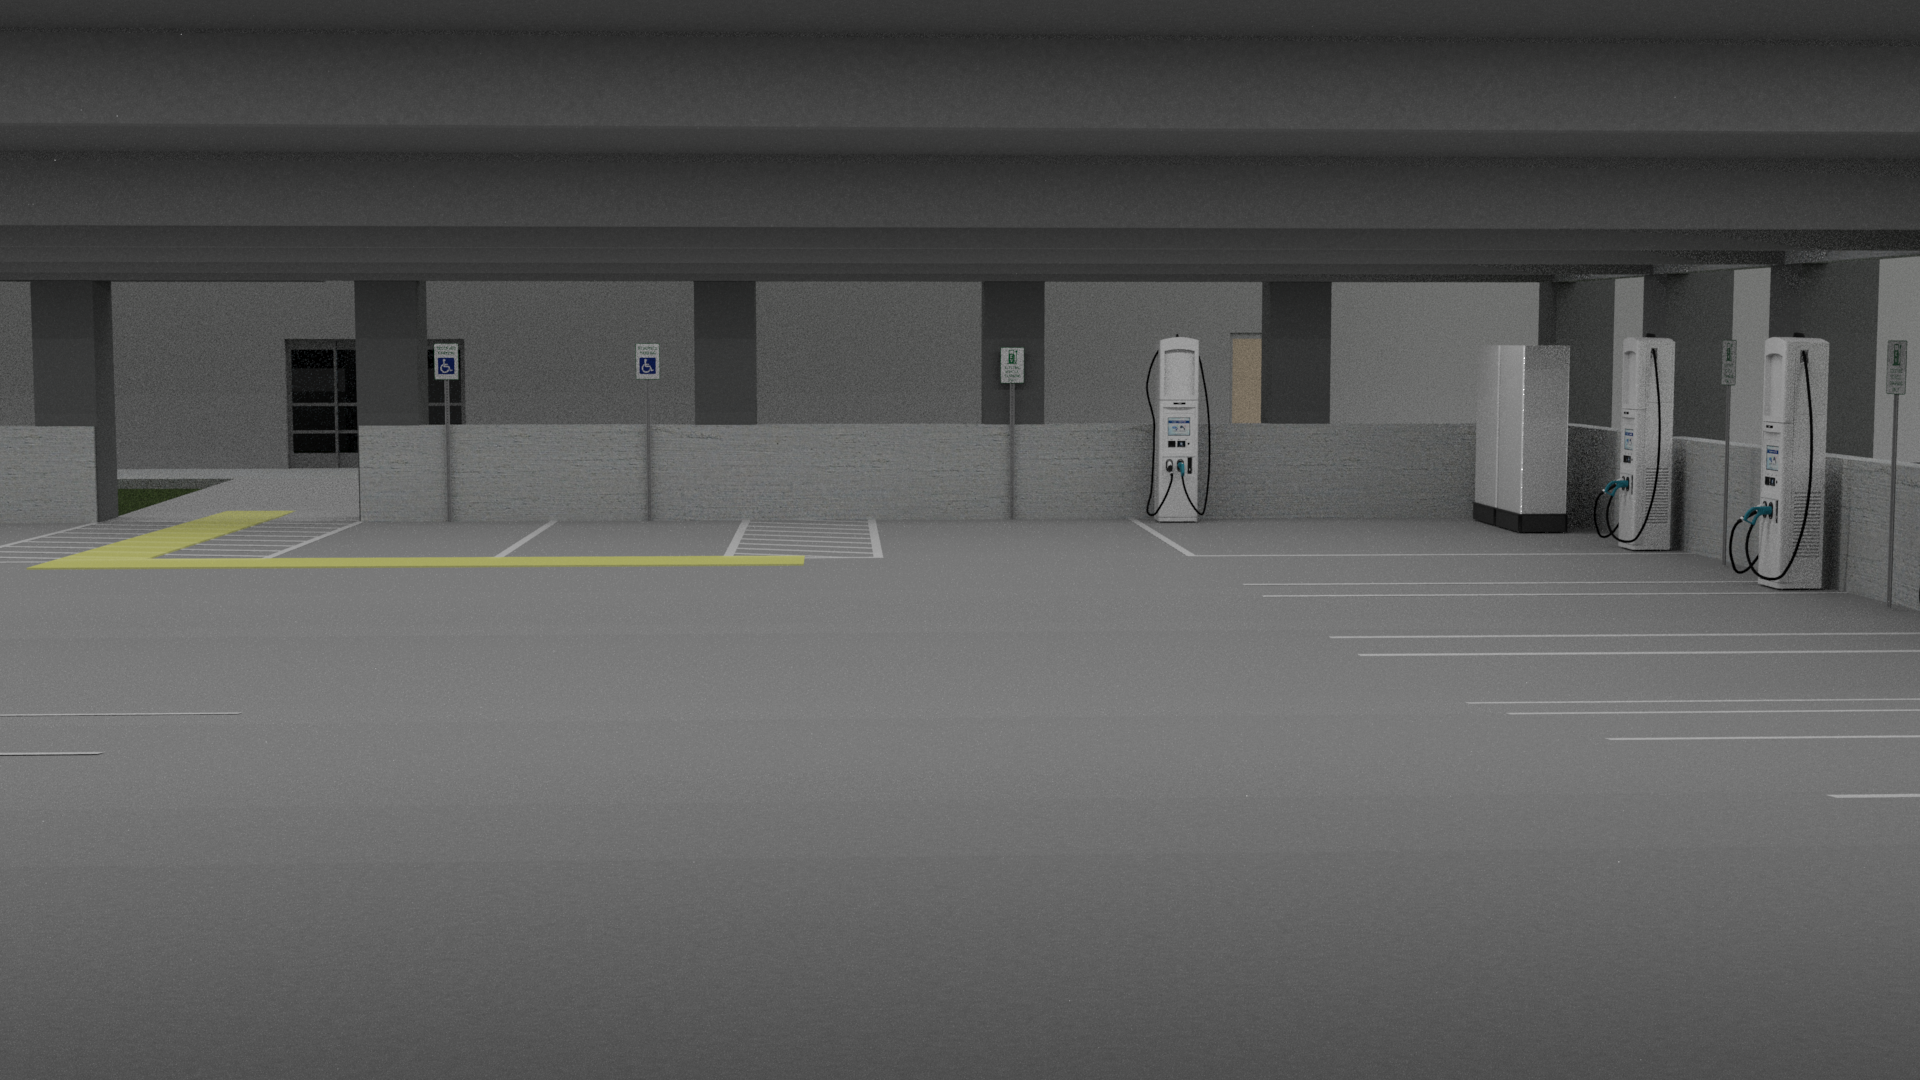 Concrete parking garage with accessible parking and EV chargers. EV charging space shares and access aisle with an accessible parking space. An accessible route connects from the access aisle to the entrance of the parking garage